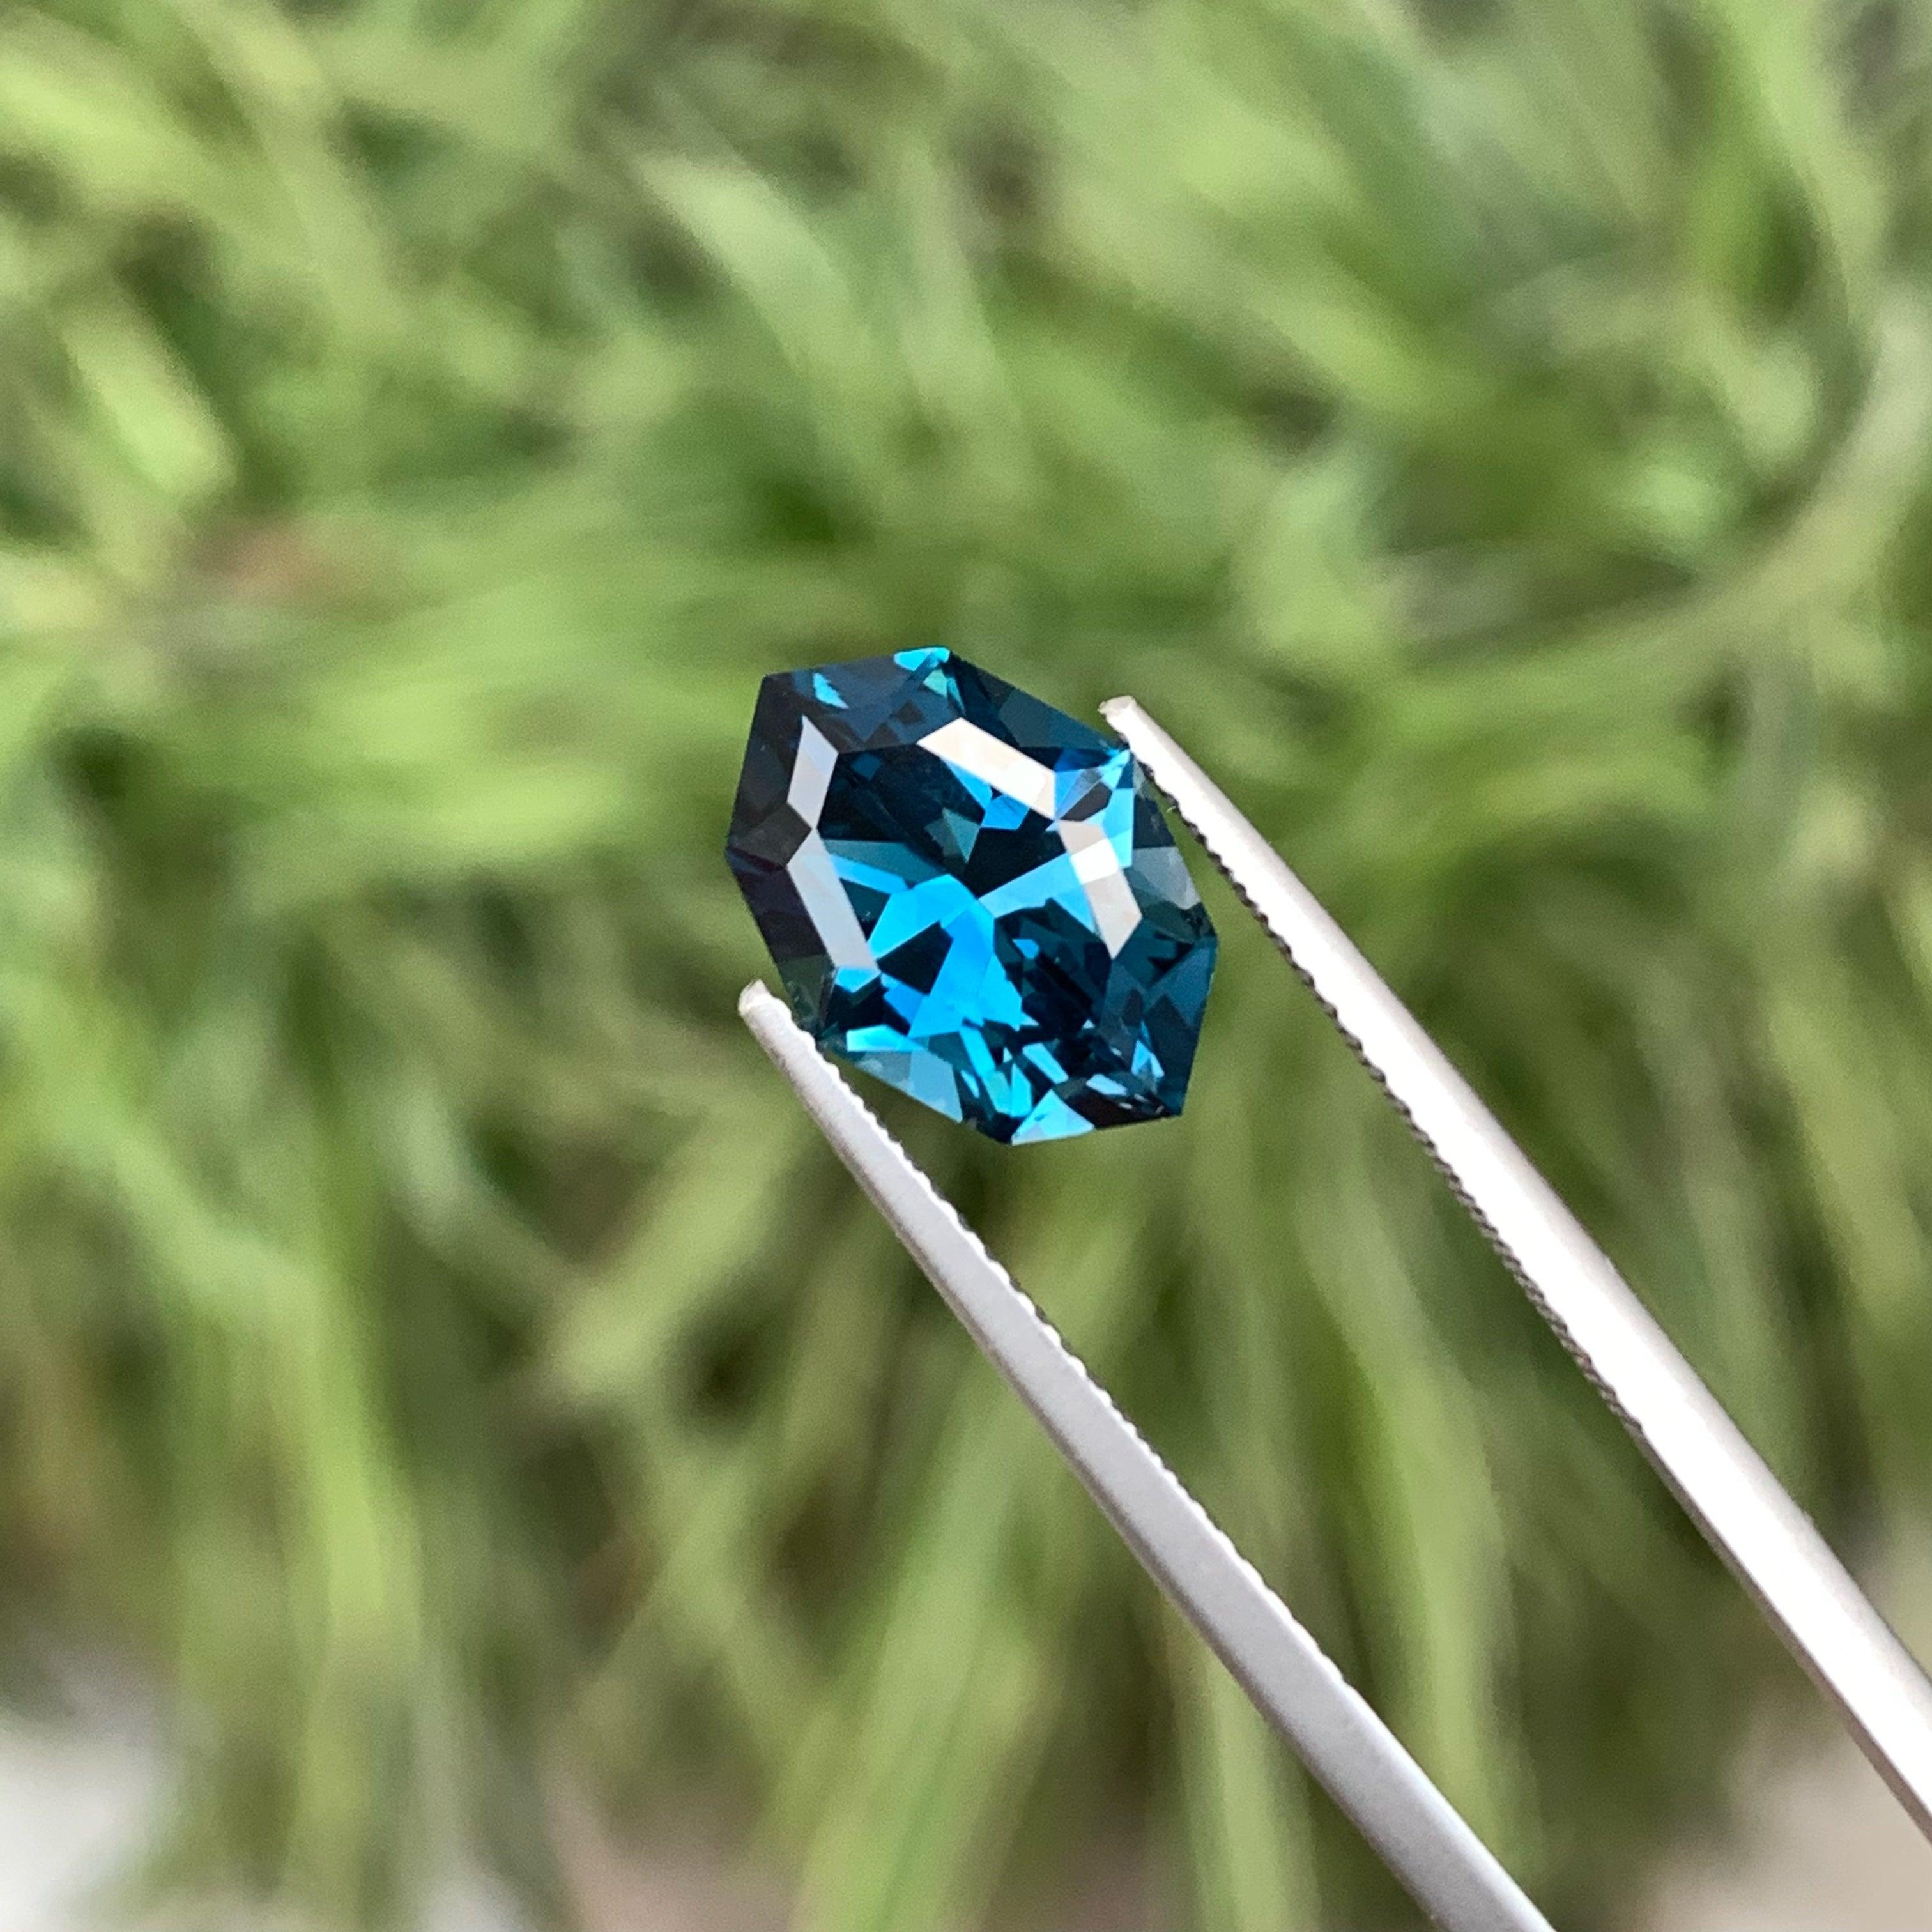 Sumptuous London Blue Topaz Gemstone, available For Sale At Wholesale Price Natural High Quality 4.25 Carats Eye Clean Clarity Natural Loose Topaz From Africa. 
Product Information:
GEMSTONE NAME: Sumptuous London Blue Topaz Gemstone
WEIGHT: 4.25